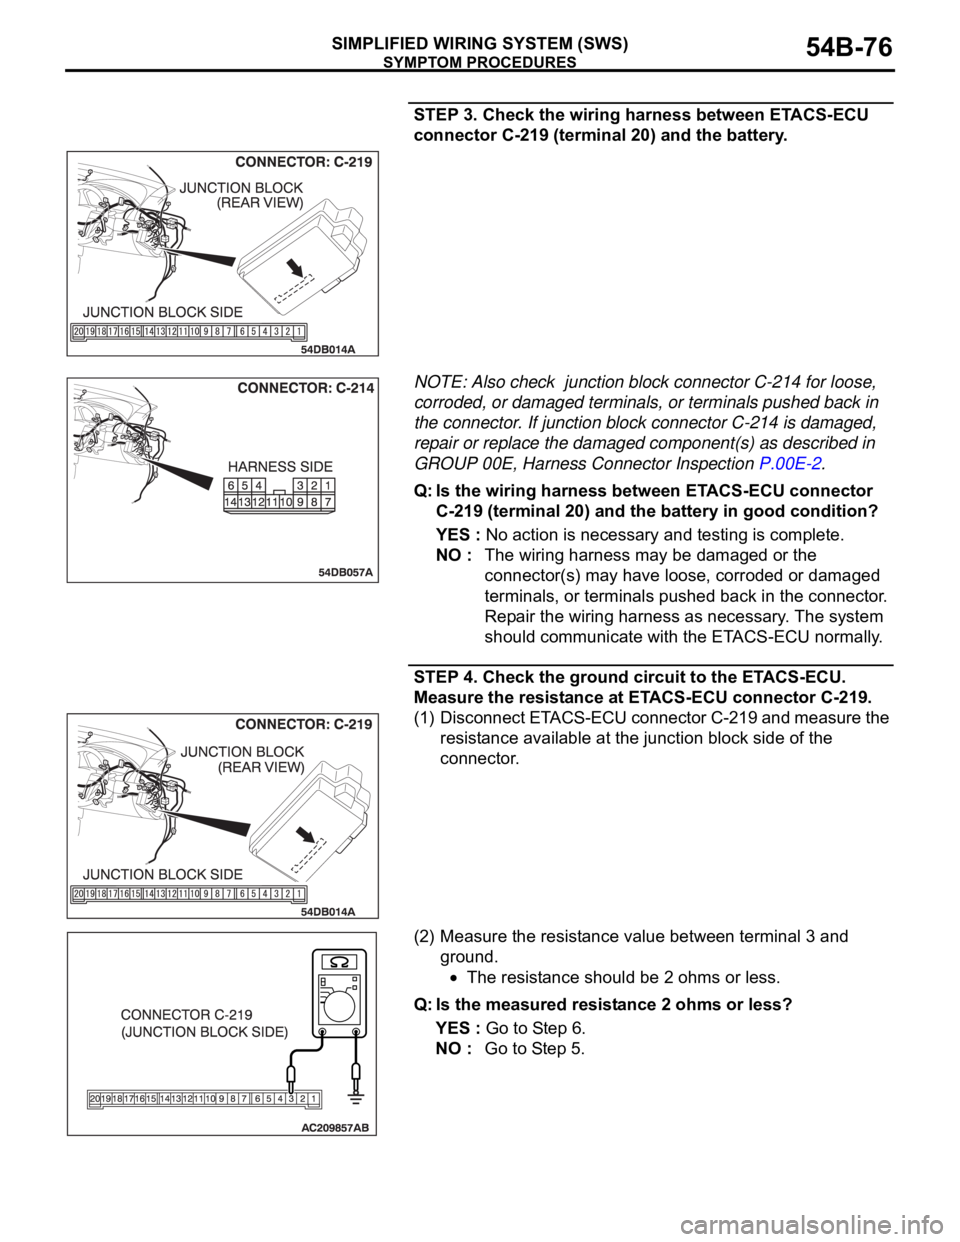 MITSUBISHI 380 2005  Workshop Manual SYMPTOM PROCEDURES
SIMPLIFIED WIRING SYSTEM (SWS)54B-76
STEP 3. Check the wiring harness between ETACS-ECU 
connector C-219 (terminal 20) and the battery.
NOTE: Also check  junction block connector C-